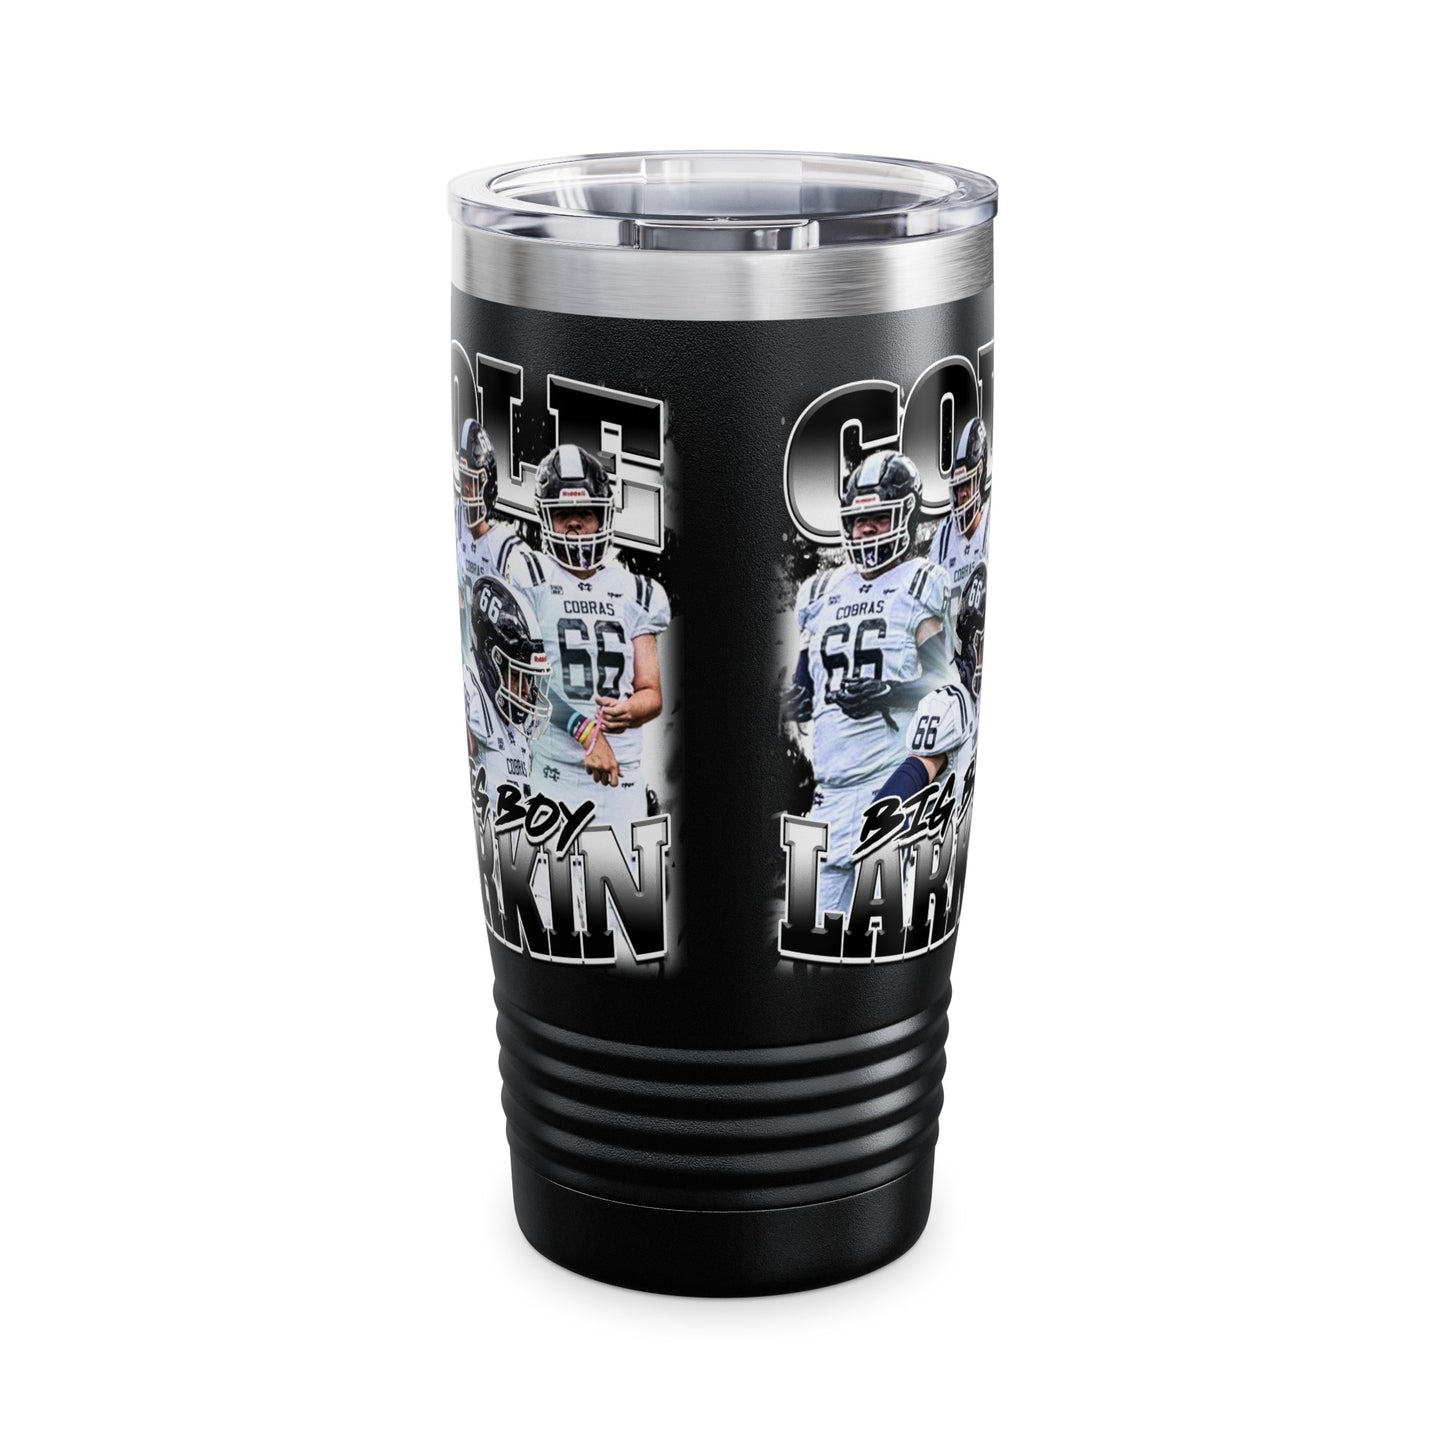 Cole Larkin Stainless Steal Tumbler